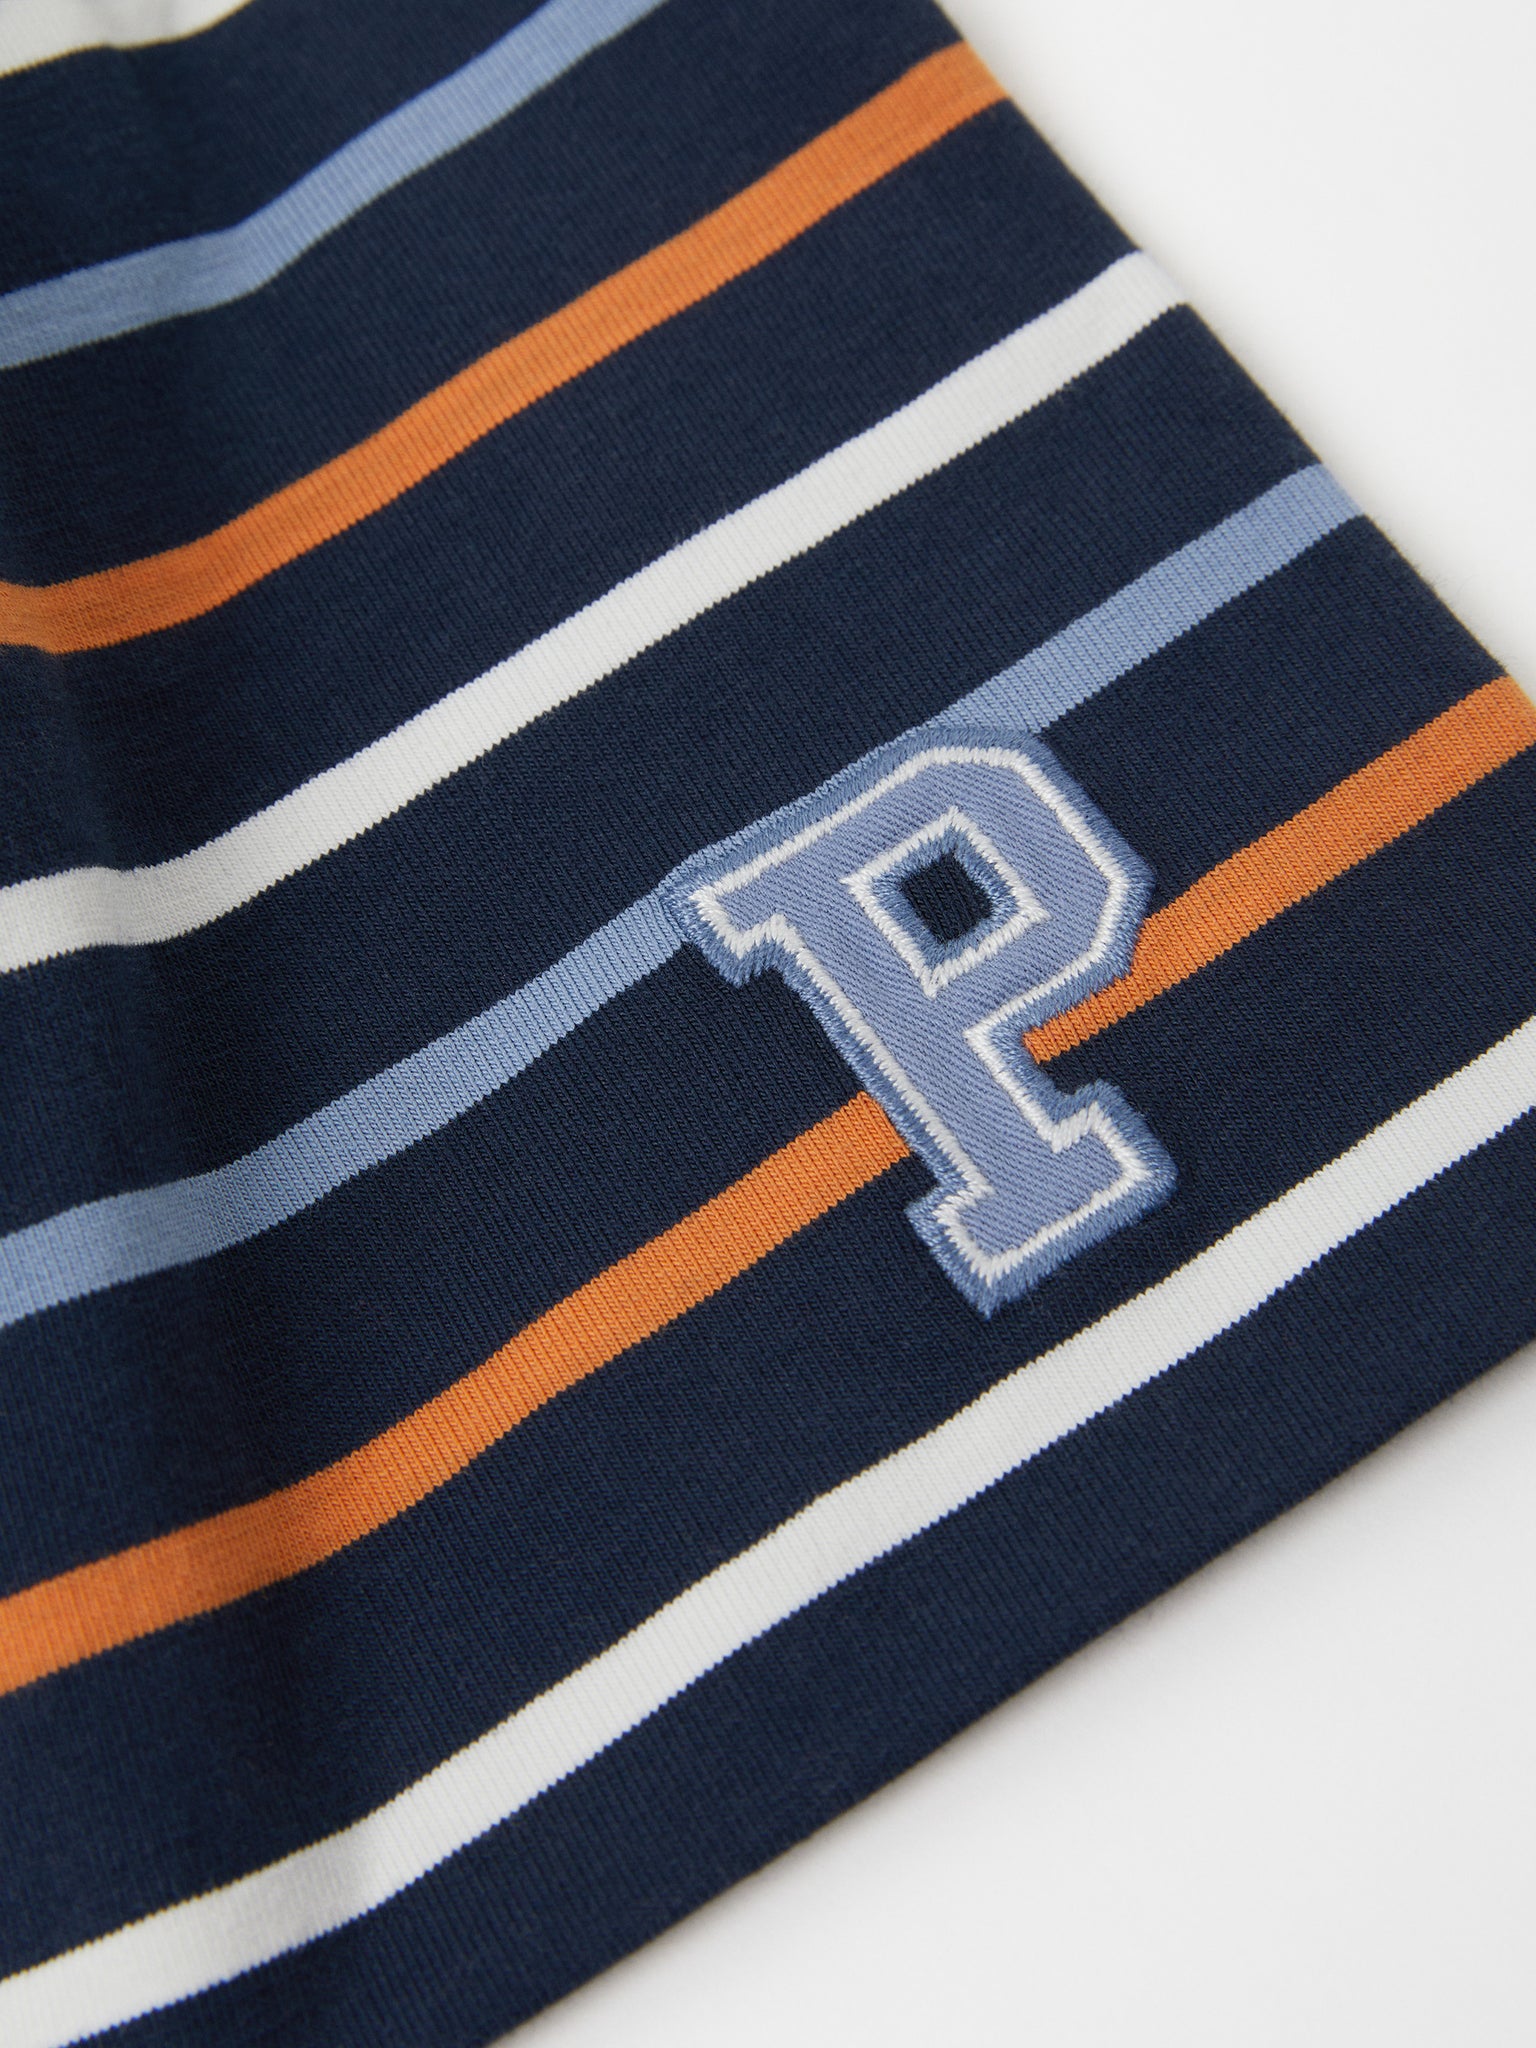 Striped Navy Kids Beanie Hat from the Polarn O. Pyret outerwear collection. Made using ethically sourced materials.